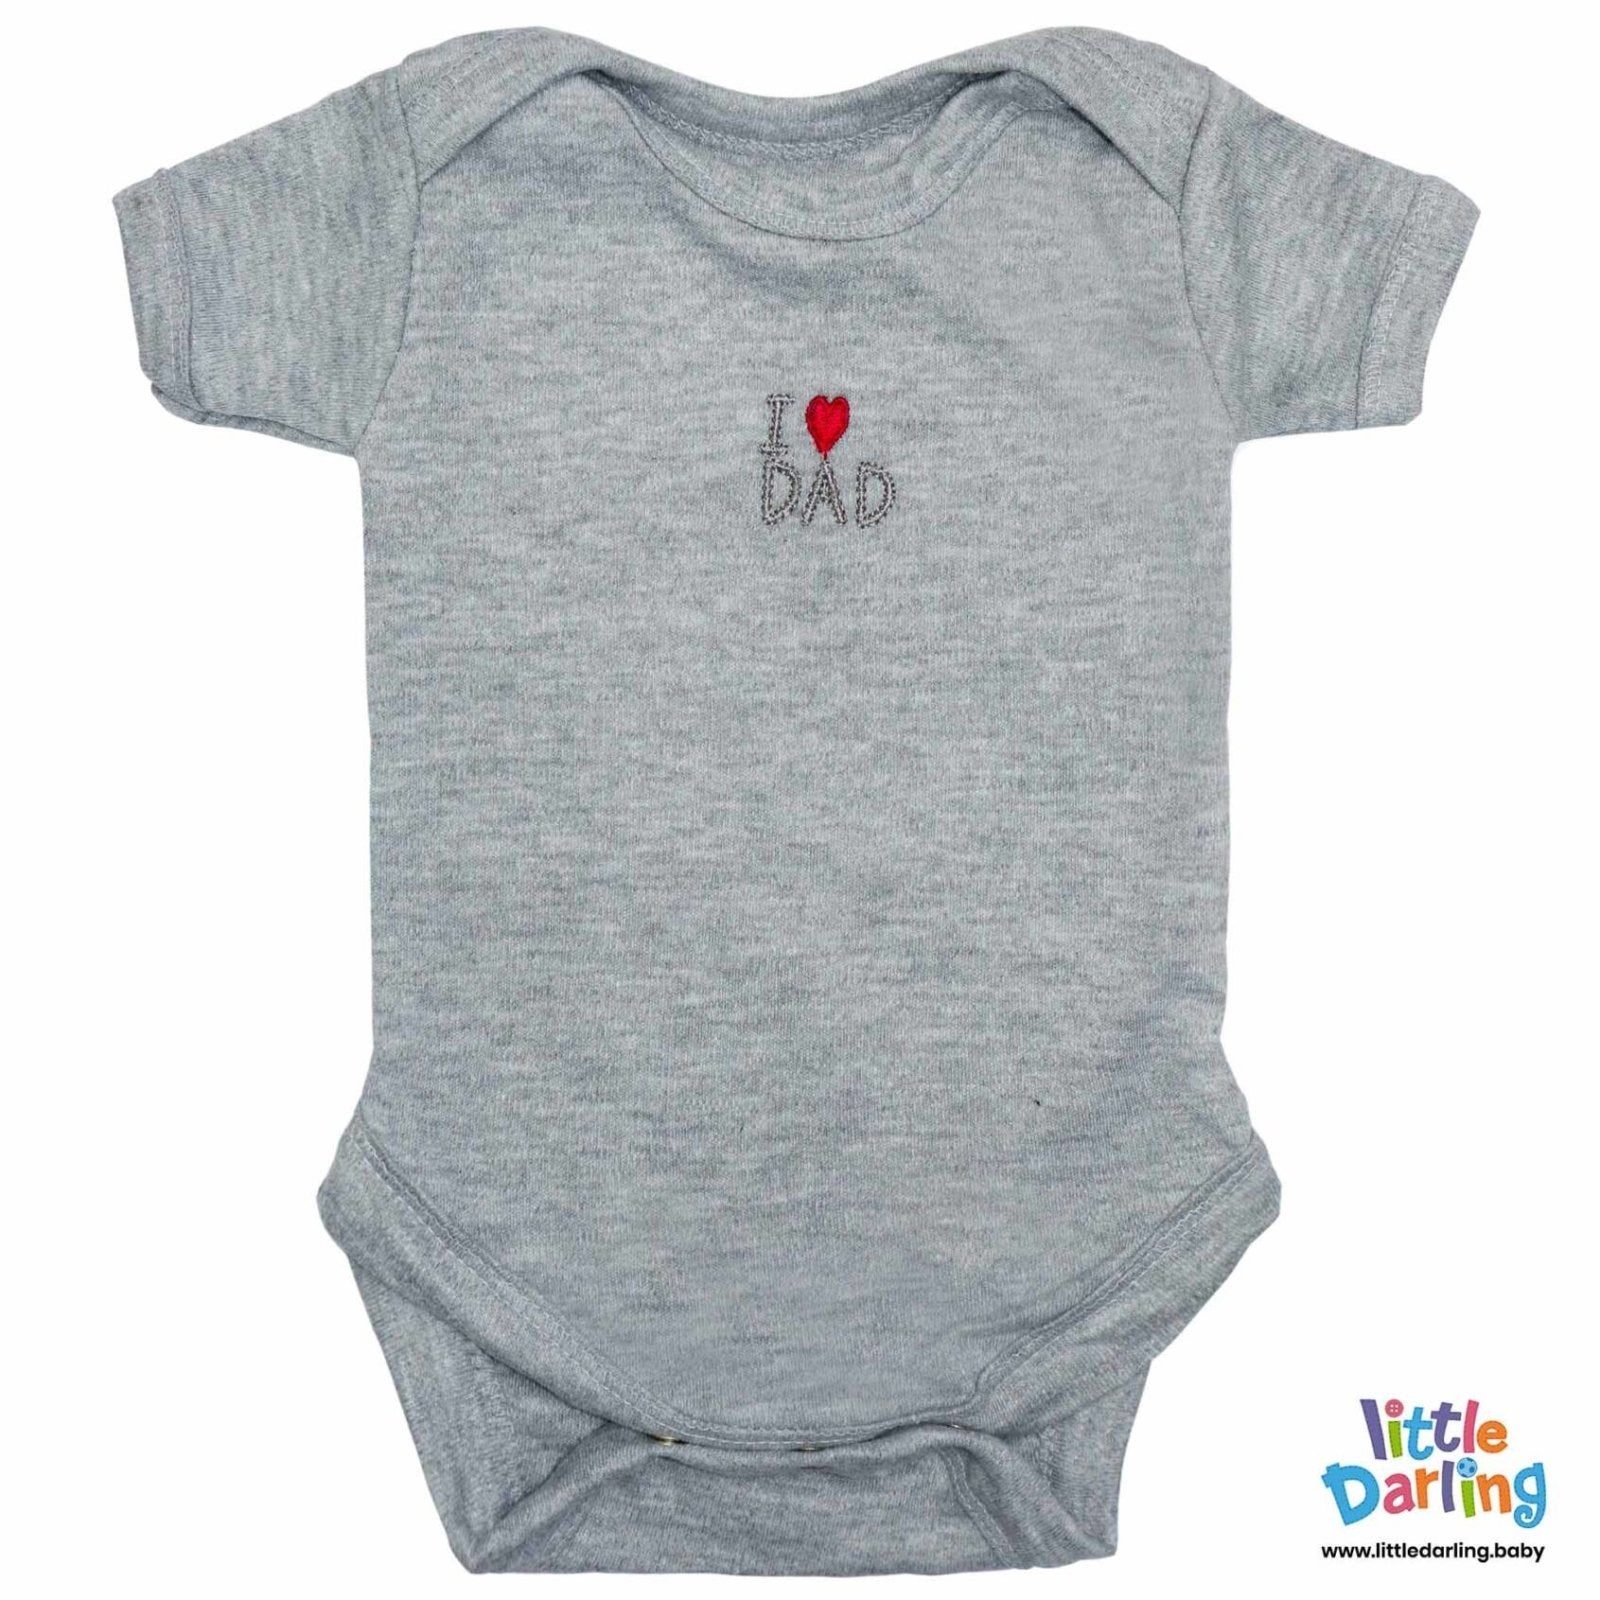 Baby Bodysuit Short Sleeves  Pk Of 3 I Love Dad by Little Darling